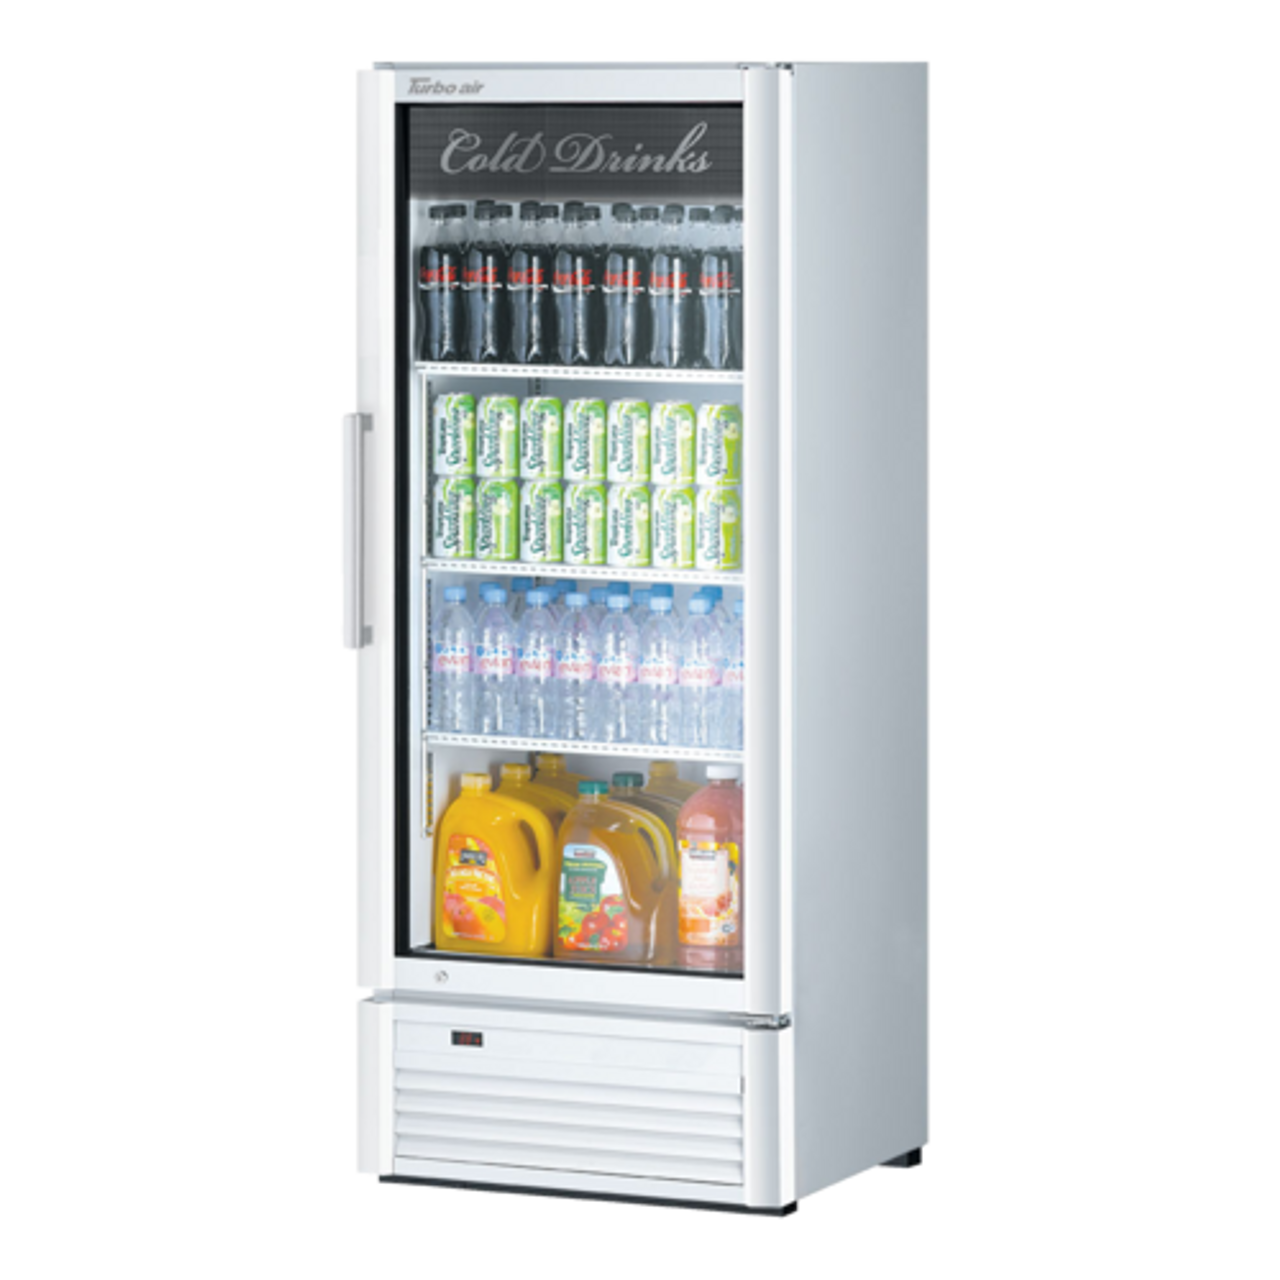 Turbo Air TGM-12SD-N6 1 Section Refrigerated Merchandiser 8.12 Cu. Ft.  - Super Deluxe Series